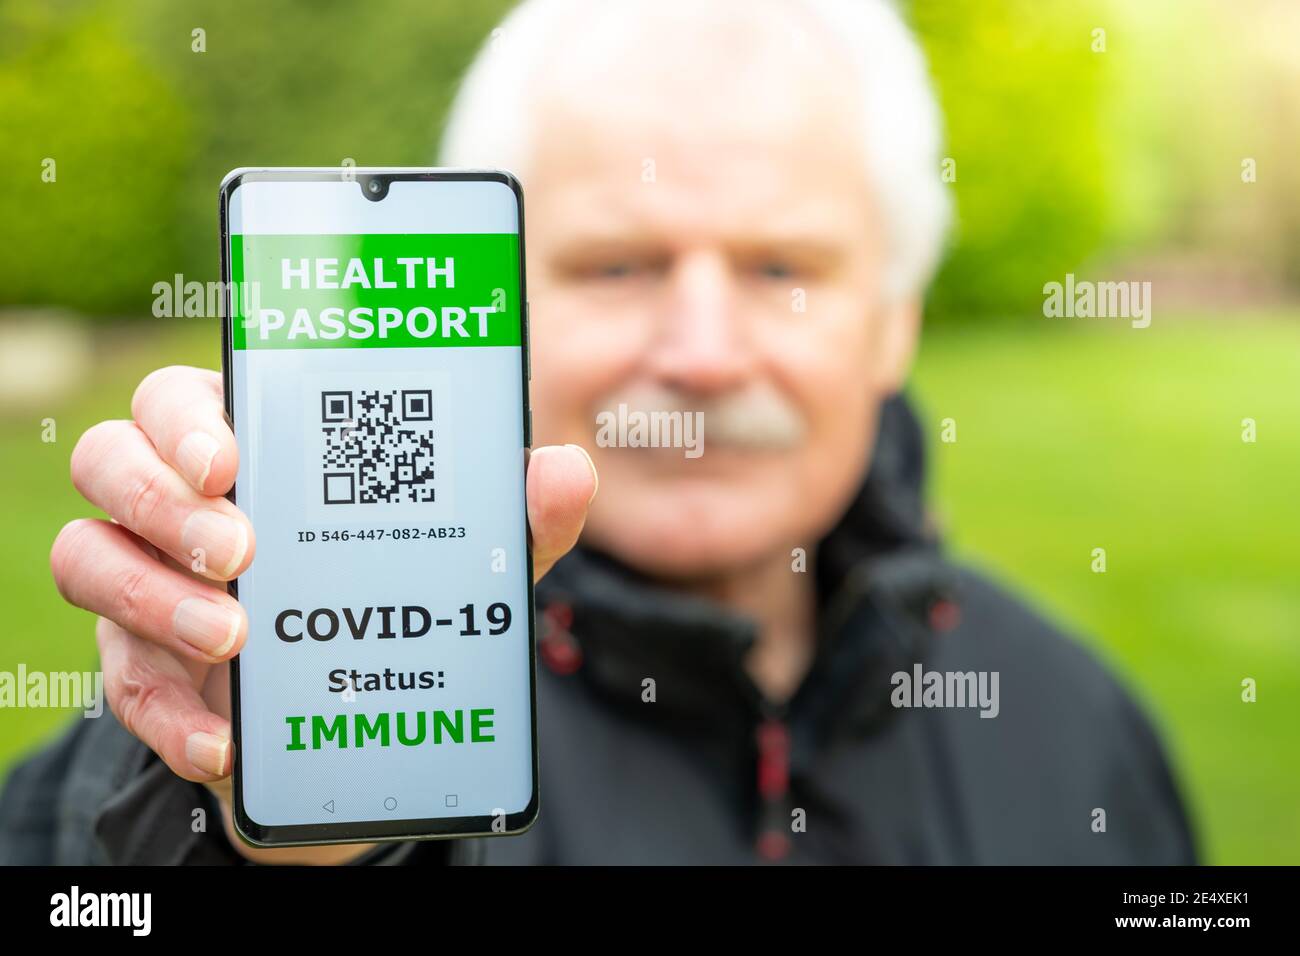 Senior man showing a health passport on a mobile phone, which indicates a vaccination against covid-19. Stock Photo